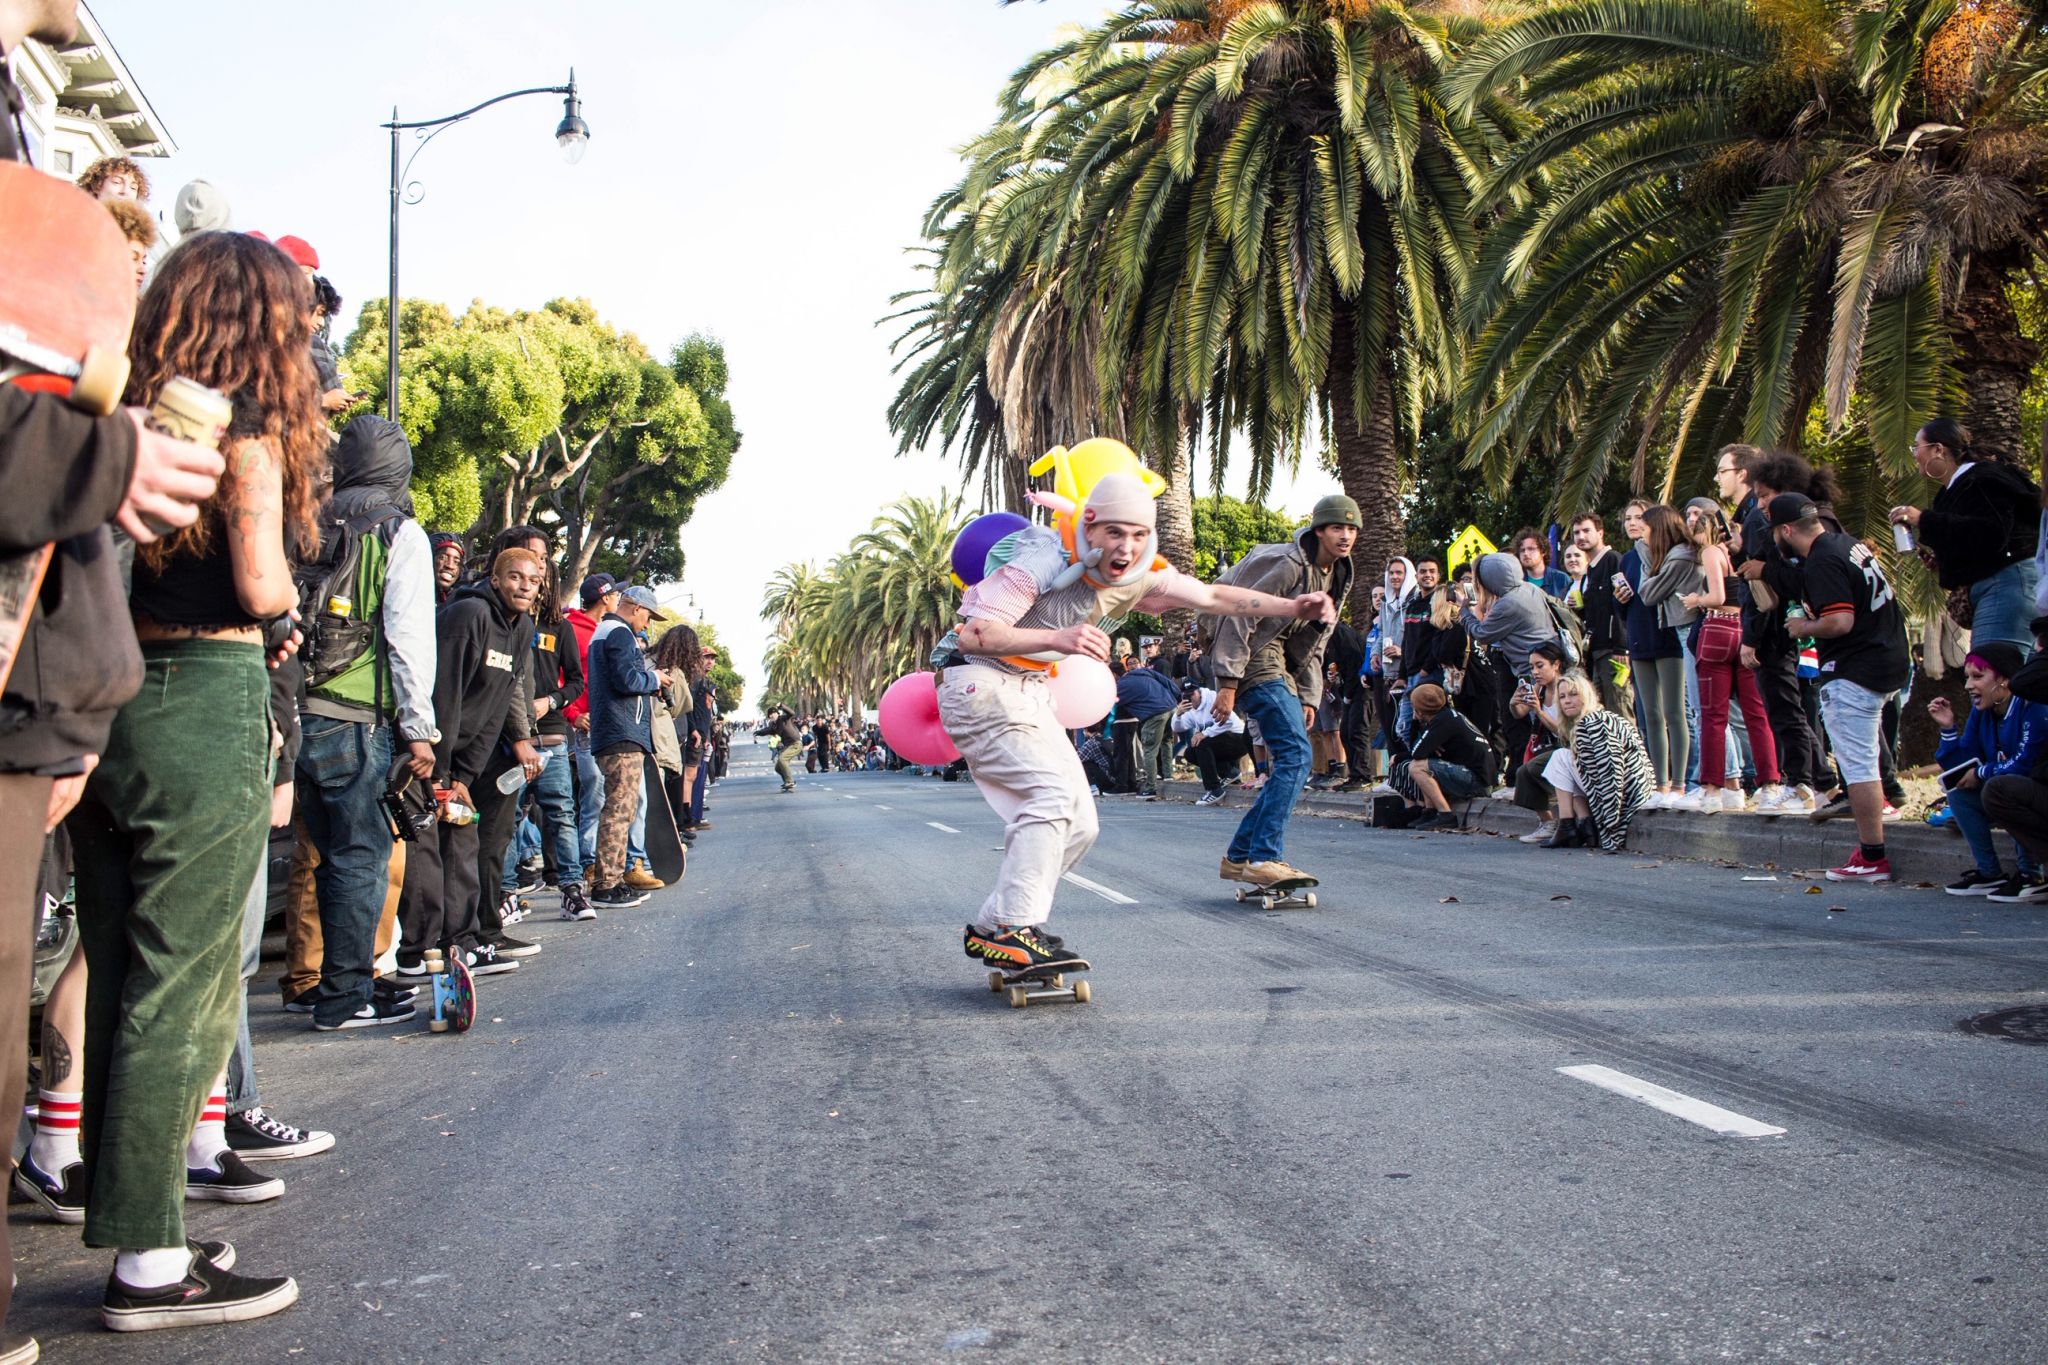 Skateboarders fly down SF's Dolores at insane speeds in flash 'hill bomb'